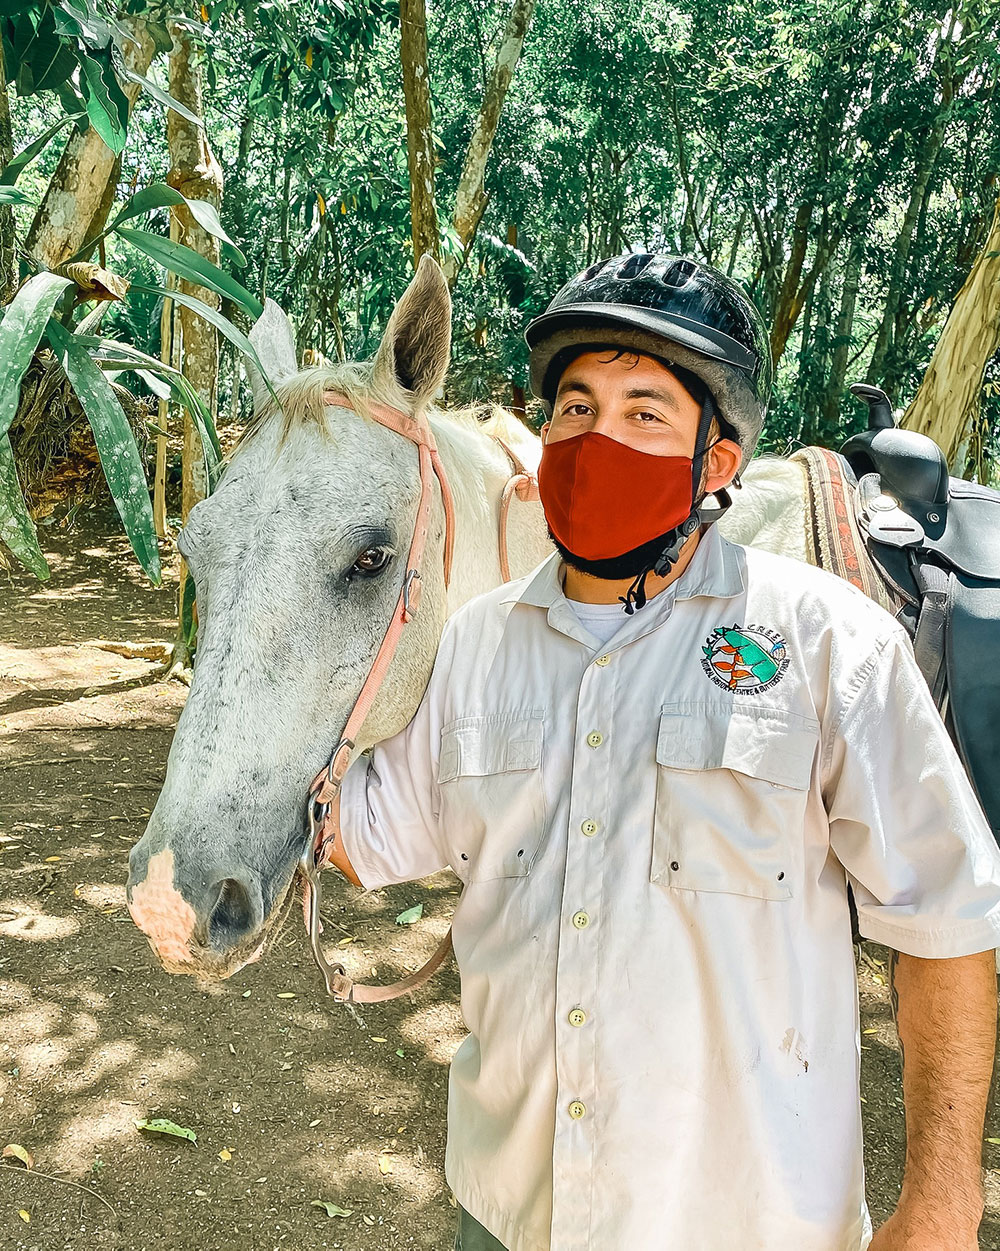 Emil a naturalist guide at Chaa Creek posing with a horse